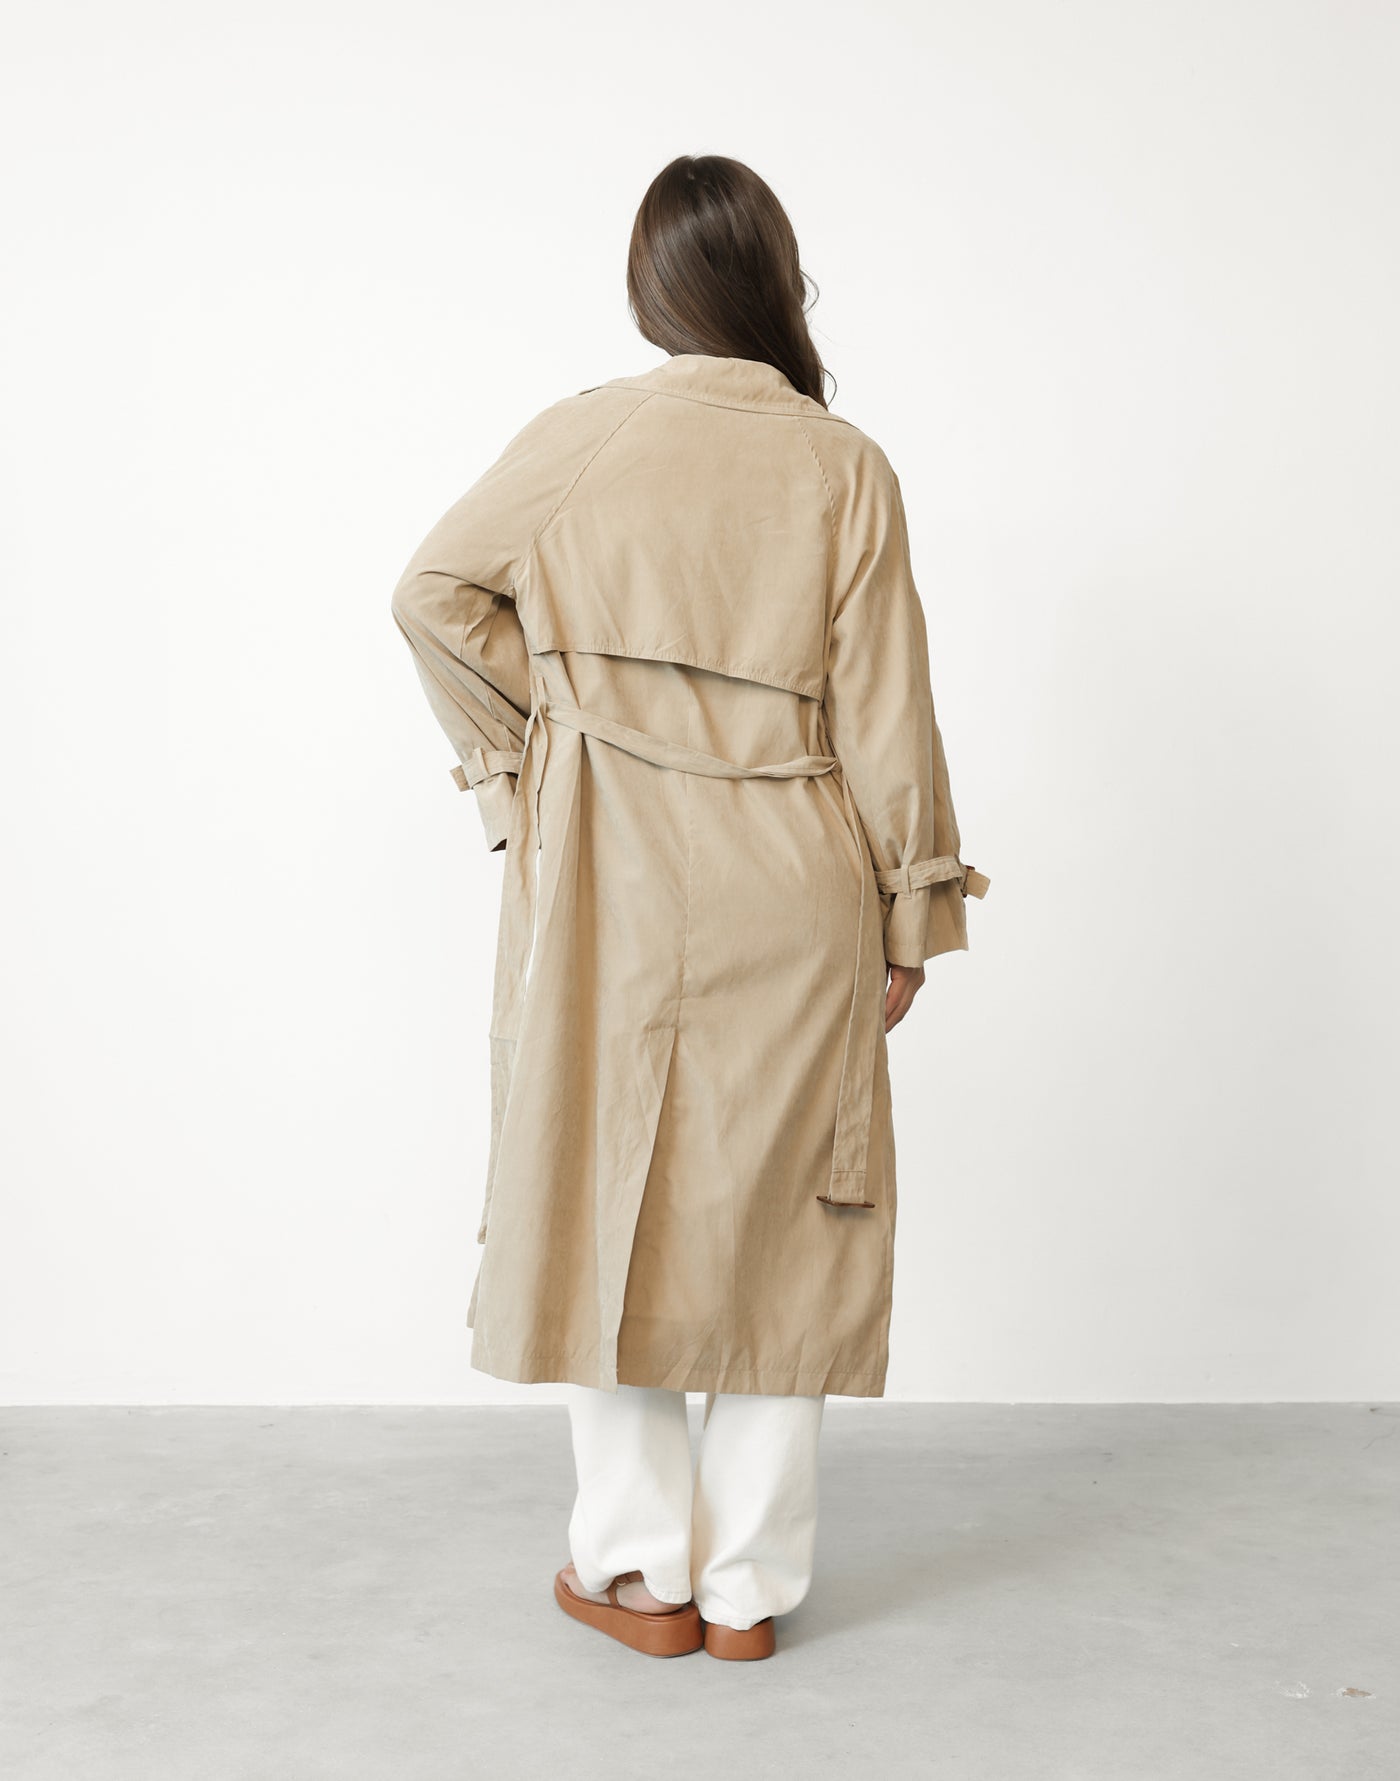 Izaiah Trench Coat (Beige) - Full Length Trench Coat with Waist Tie - Women's Outerwear - Charcoal Clothing